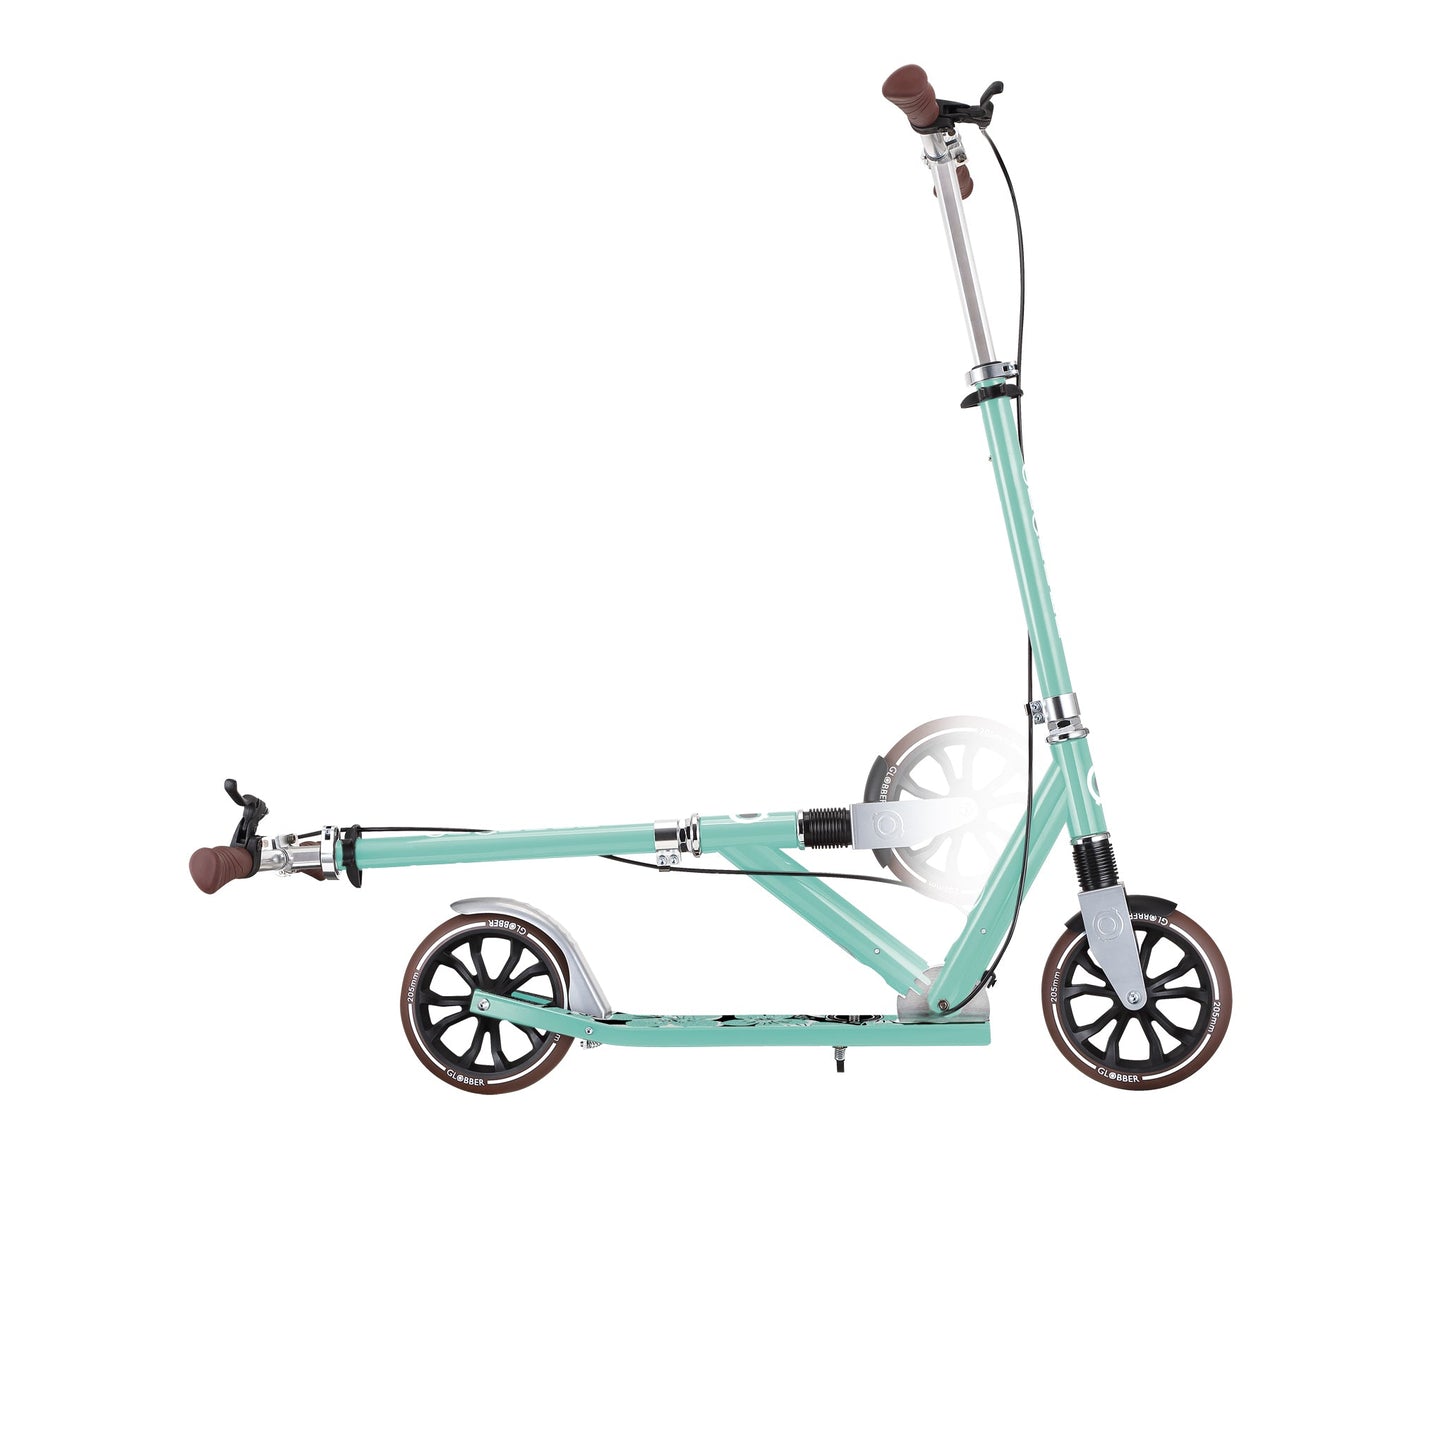 NL 205 Deluxe: Big Wheel Scooter with Handbrake for Kids and Teens - Mint